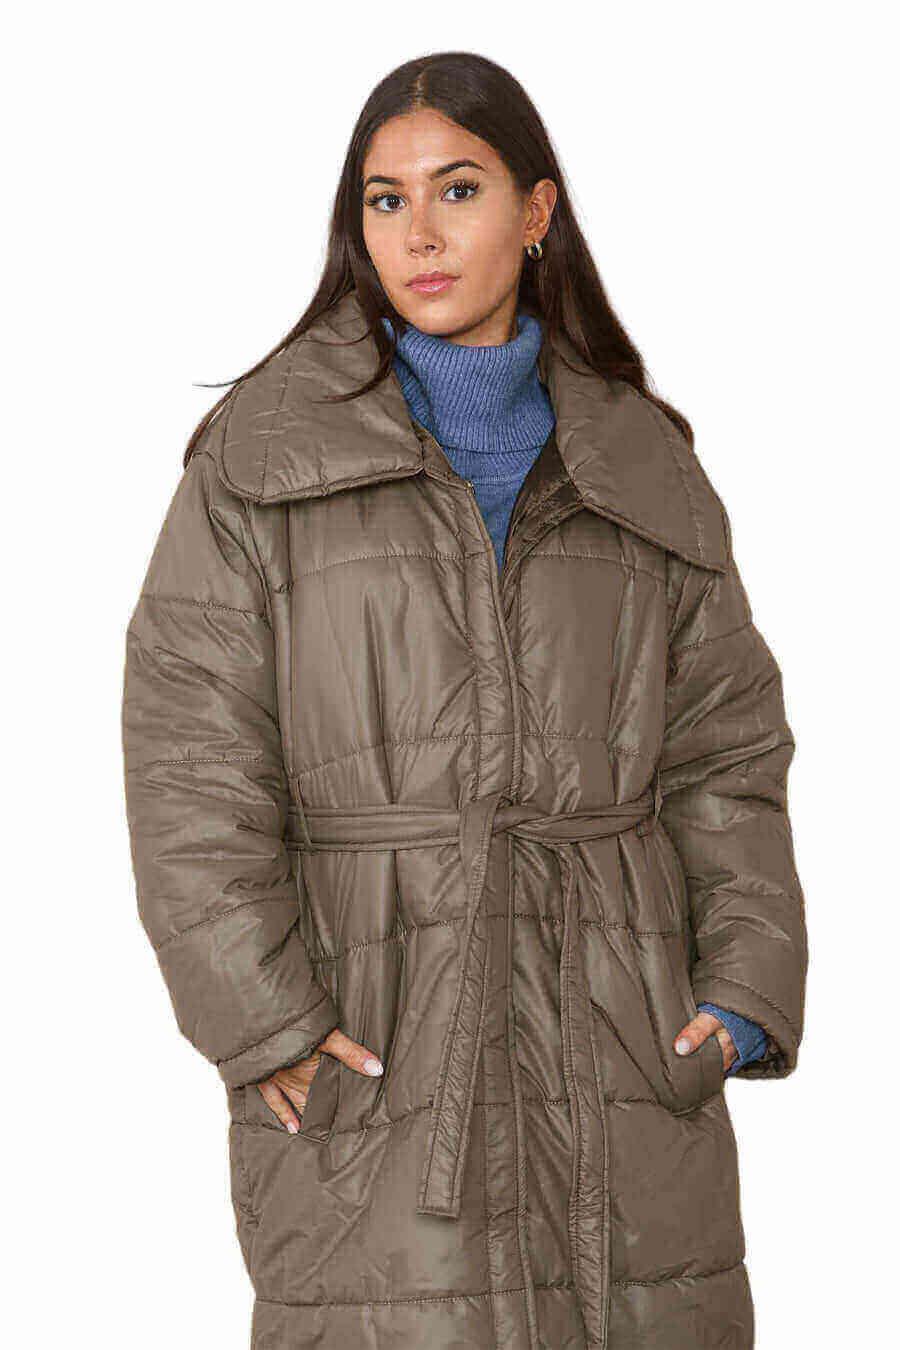 Close View of Chic Long Olive Puffer Coat for Womens